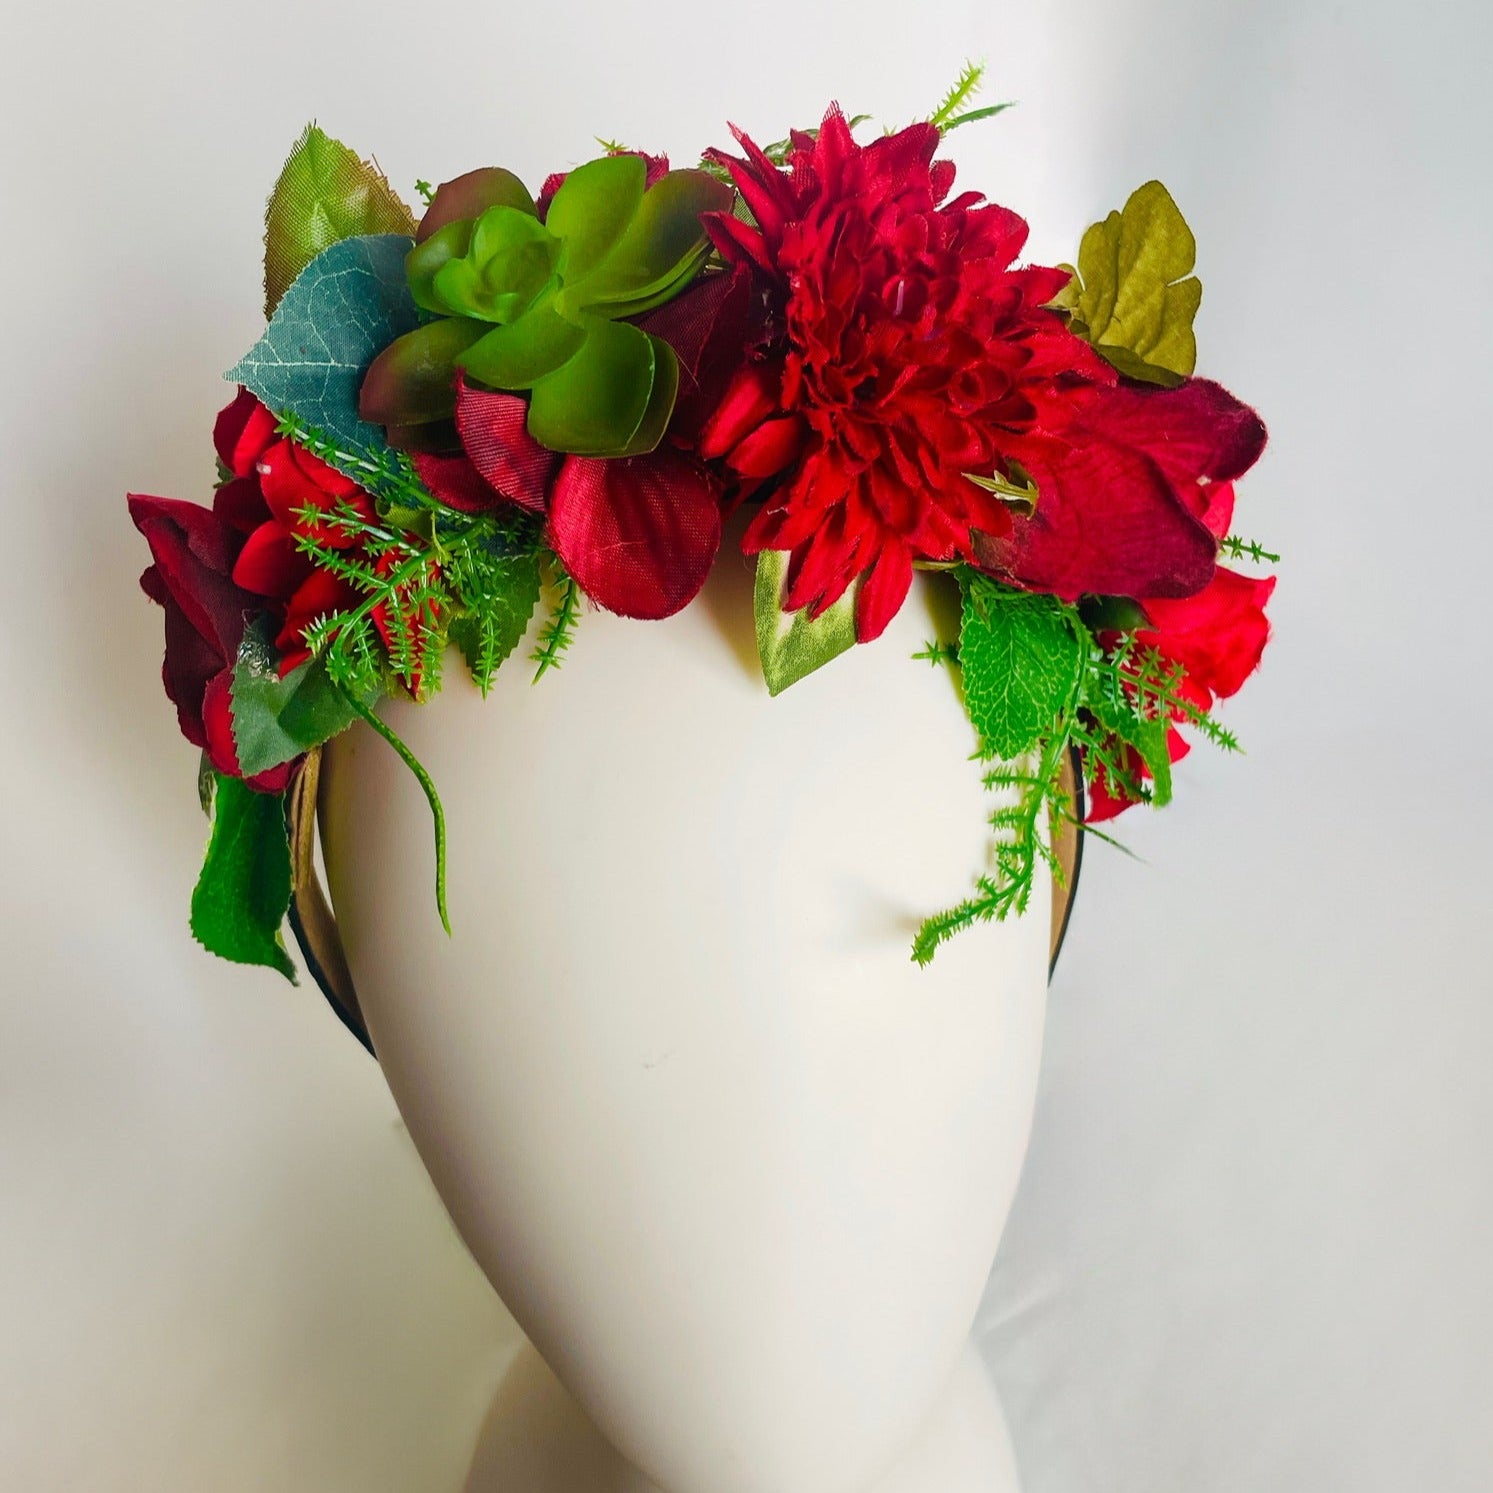 Las Ofrendas One of a Kind Red and Green Frida Kahlo Inspired Flower Crown Headpiece - Las Ofrendas 